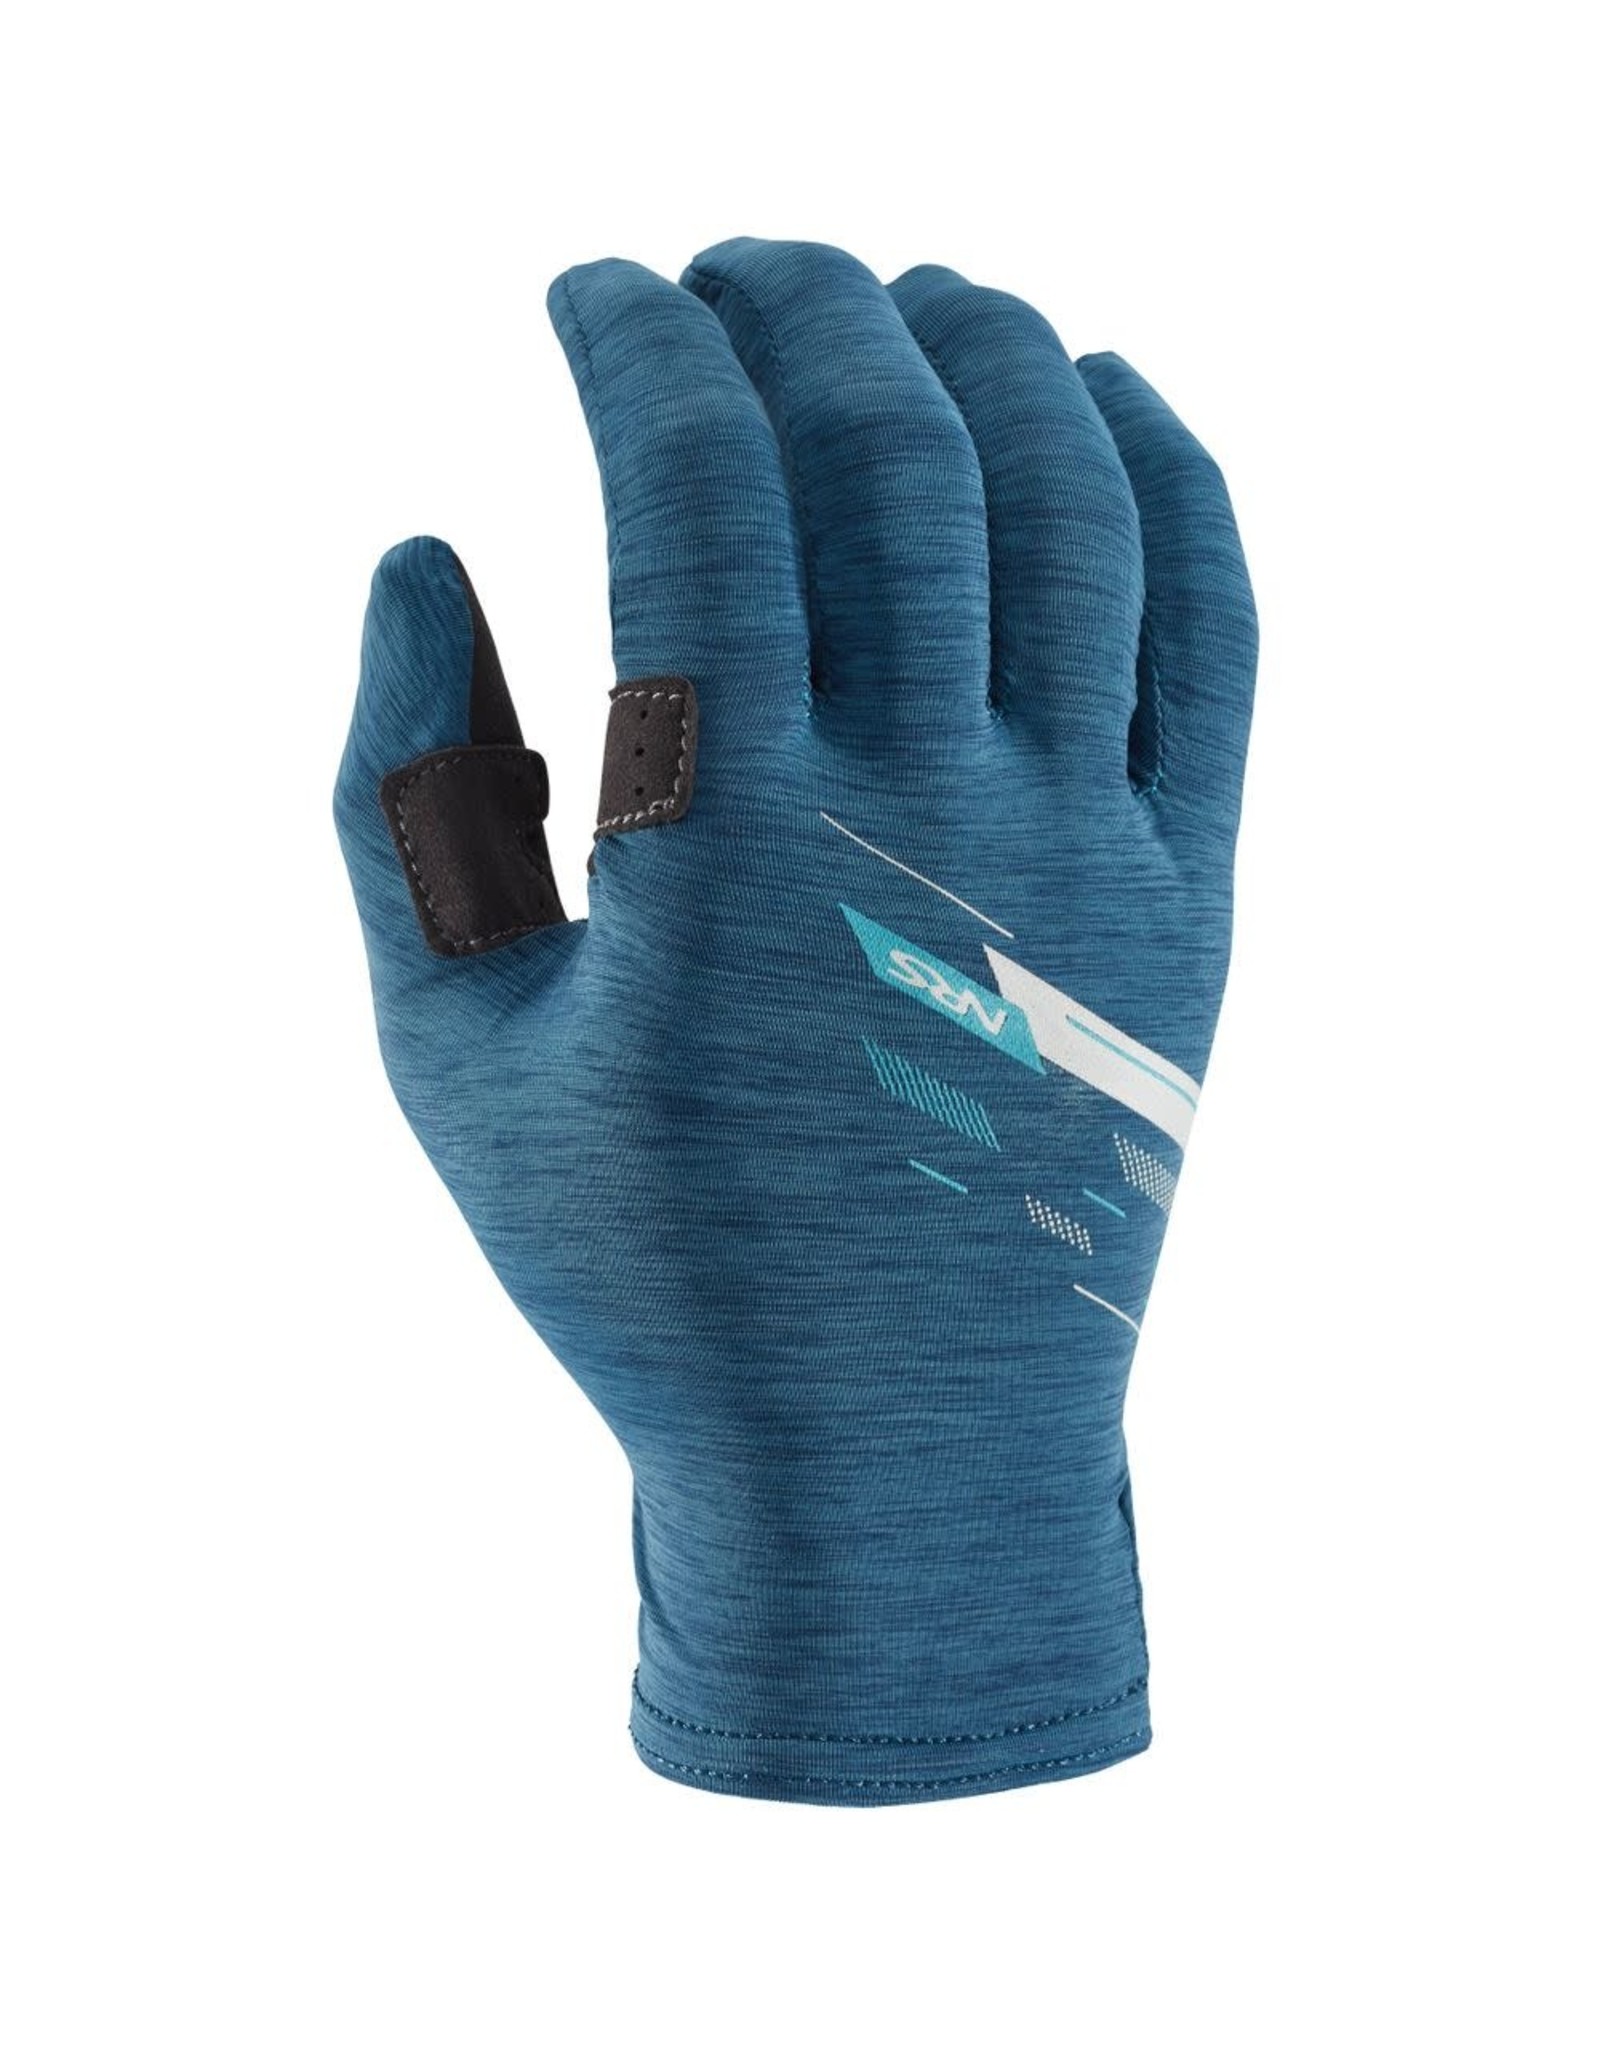 NRS NRS Cove Gloves - Closeout